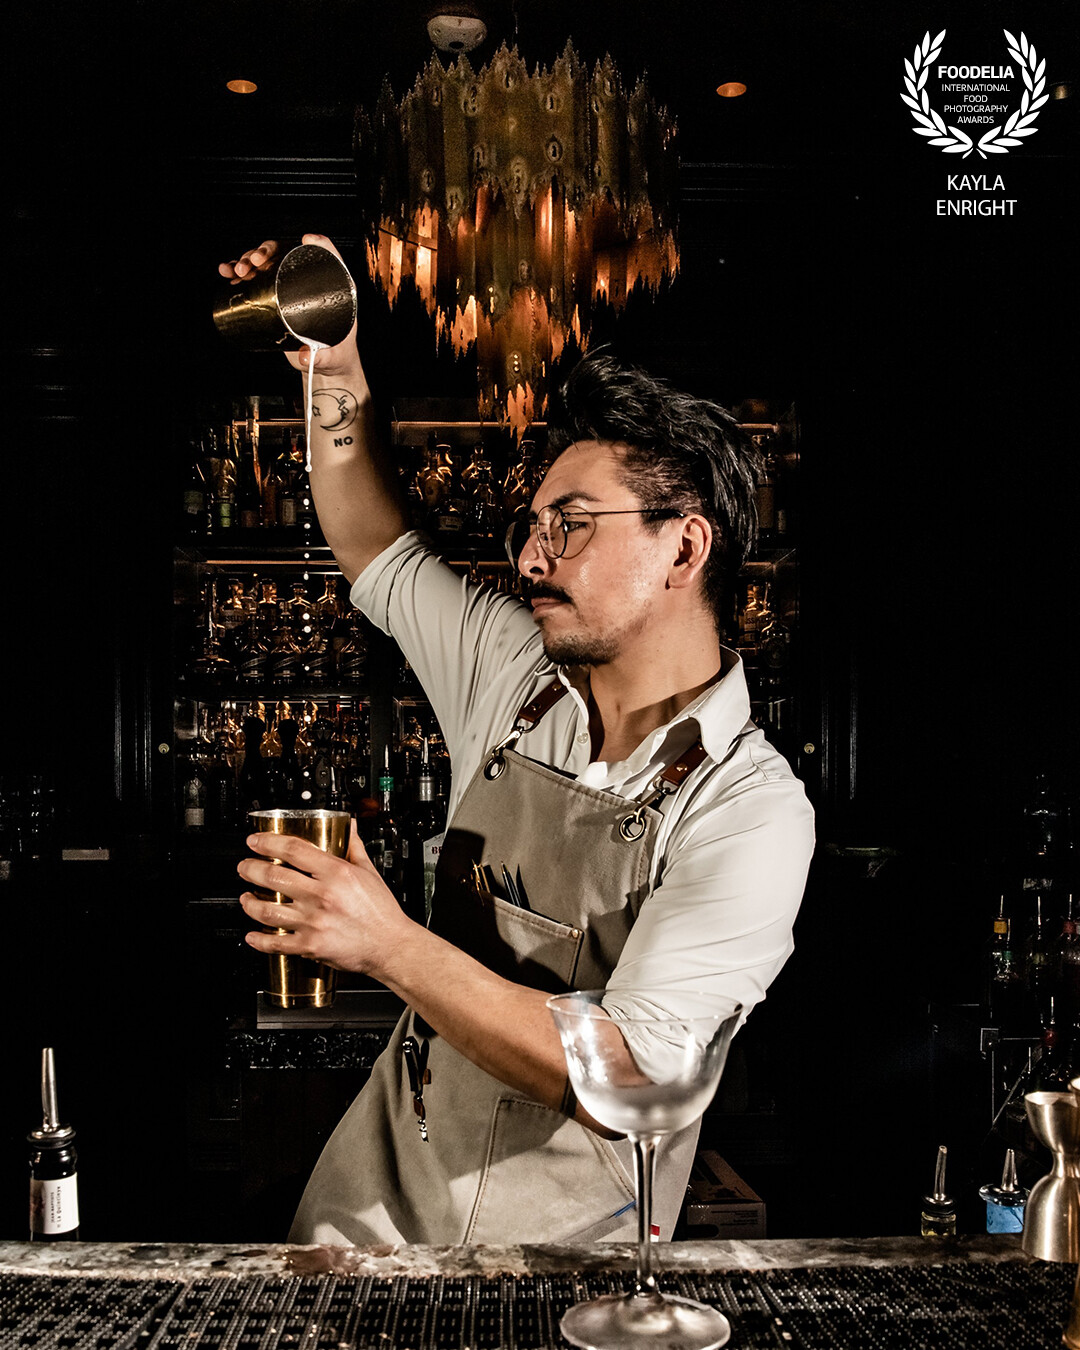 A mixologist continuing to perfect his craft in the darkness of a classic upscale bar.